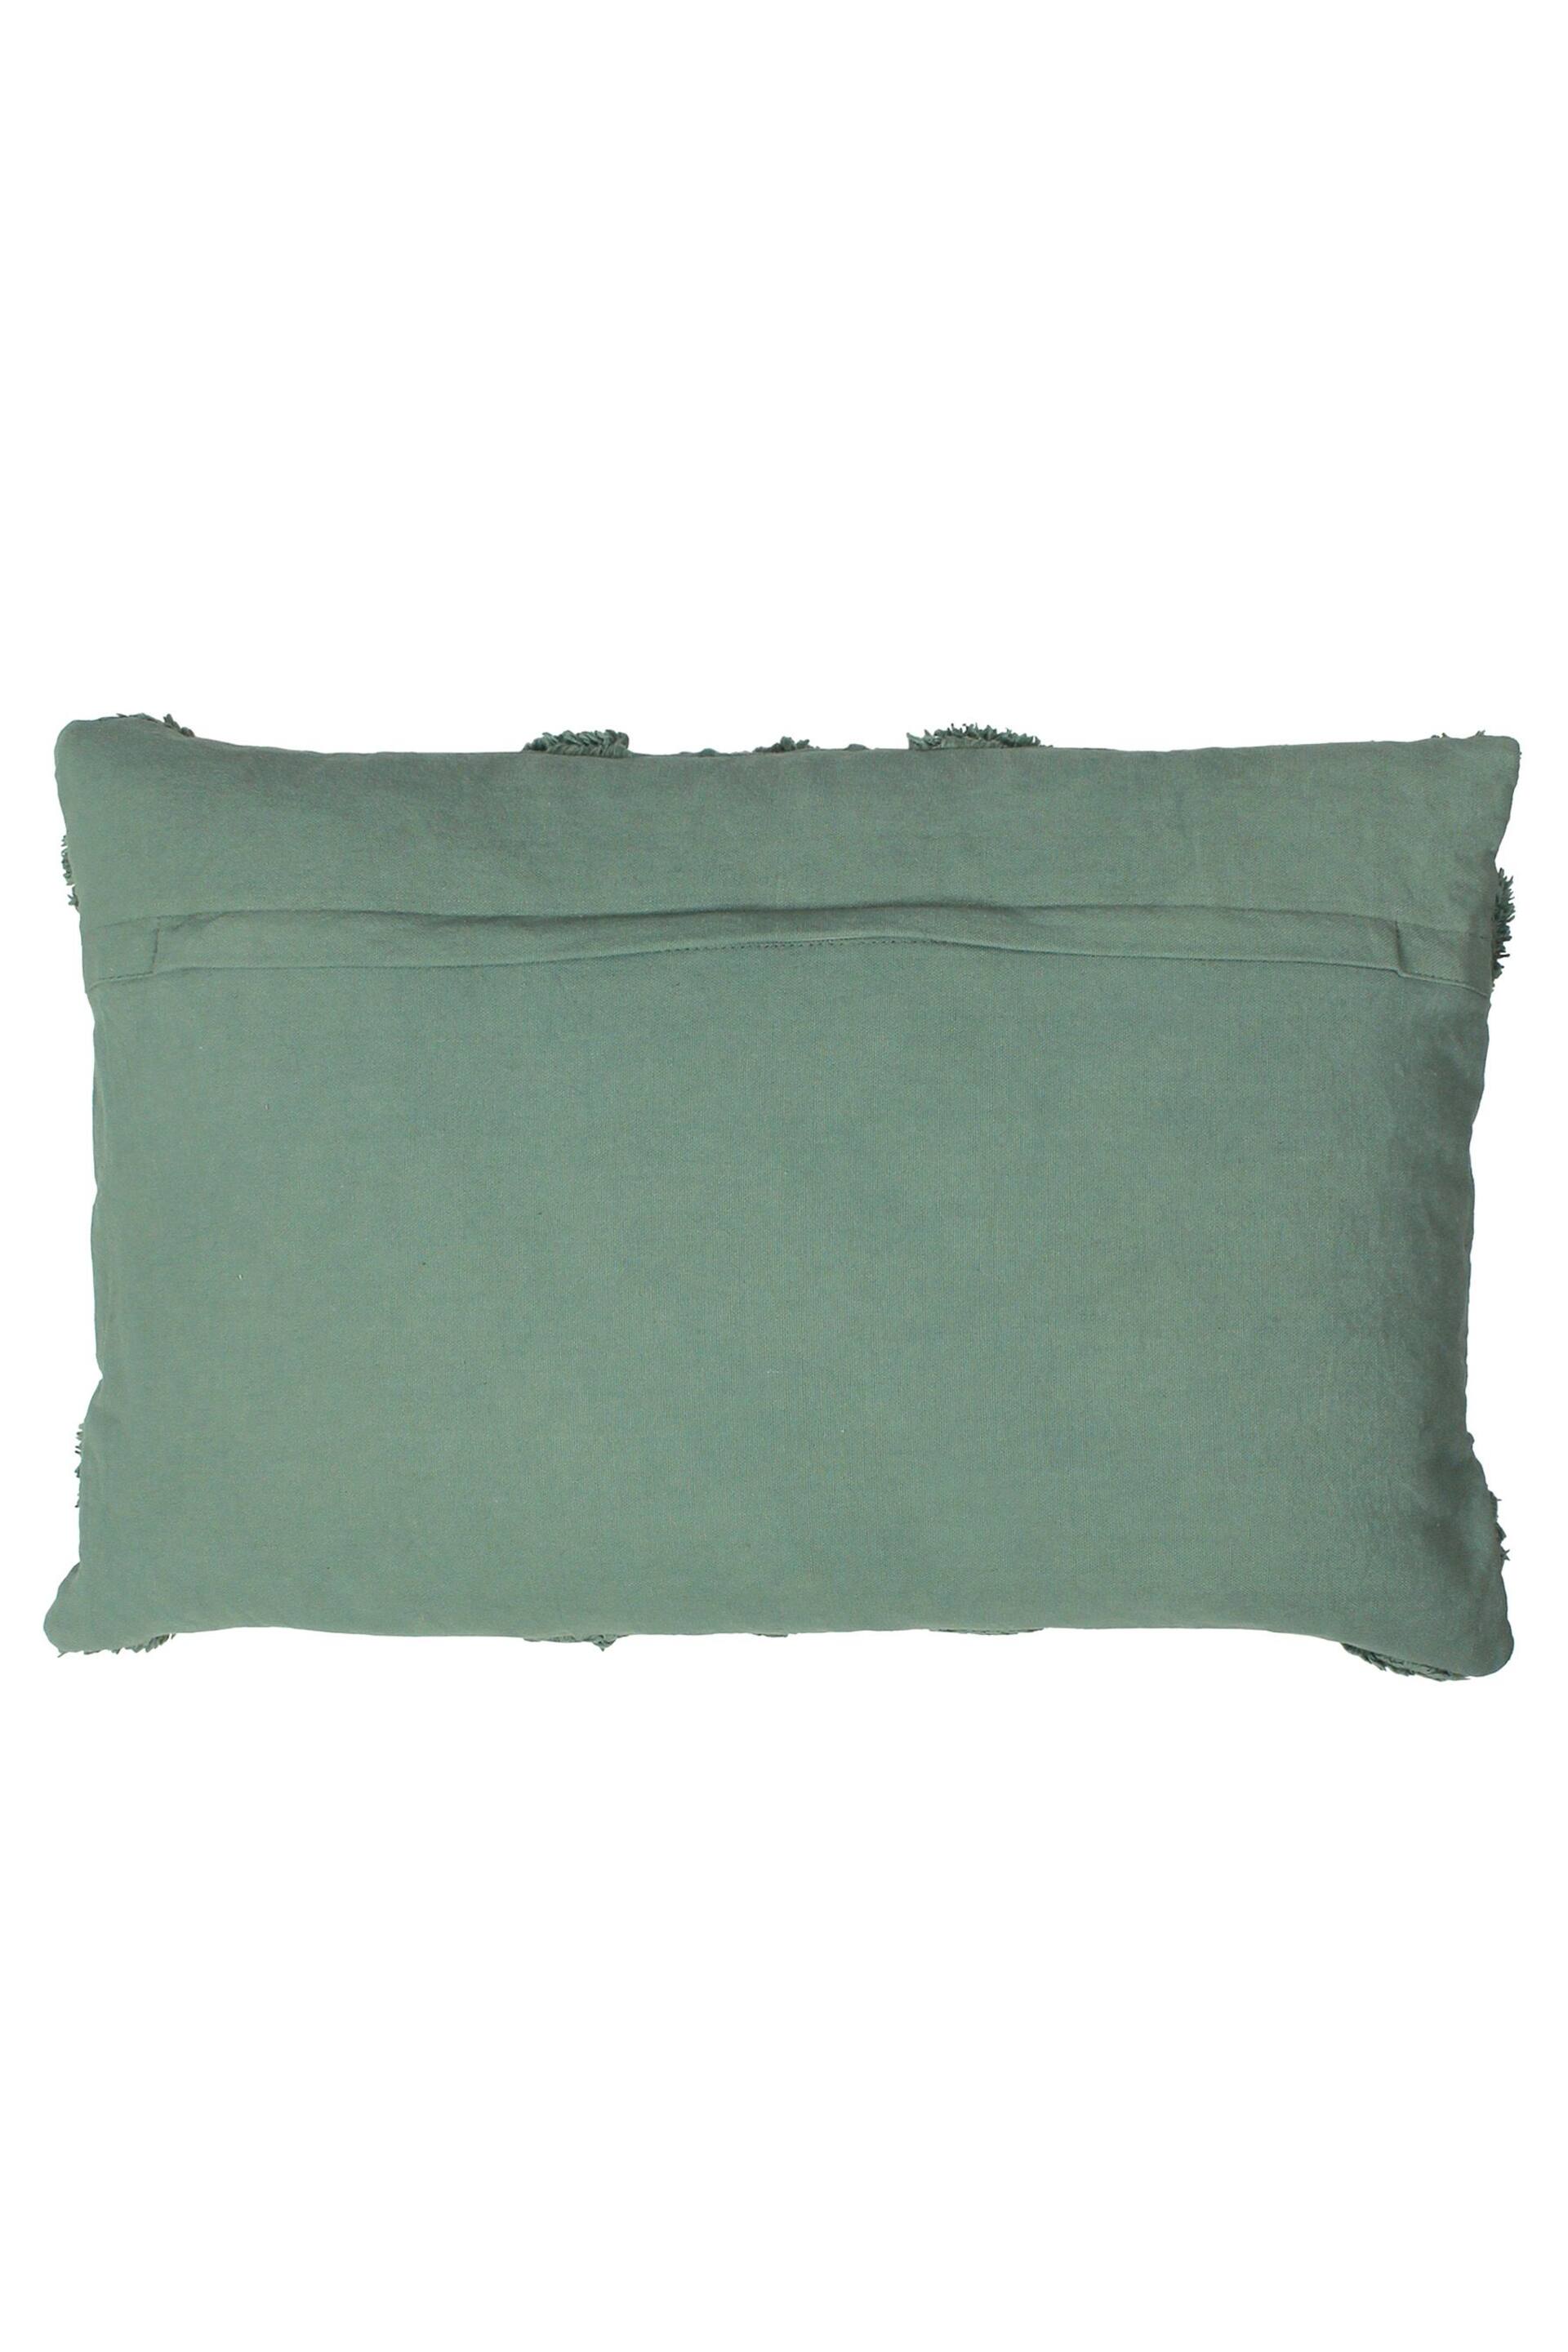 furn. Eucalyptus Green Orson Tufted Polyester Filled Cushion - Image 2 of 3